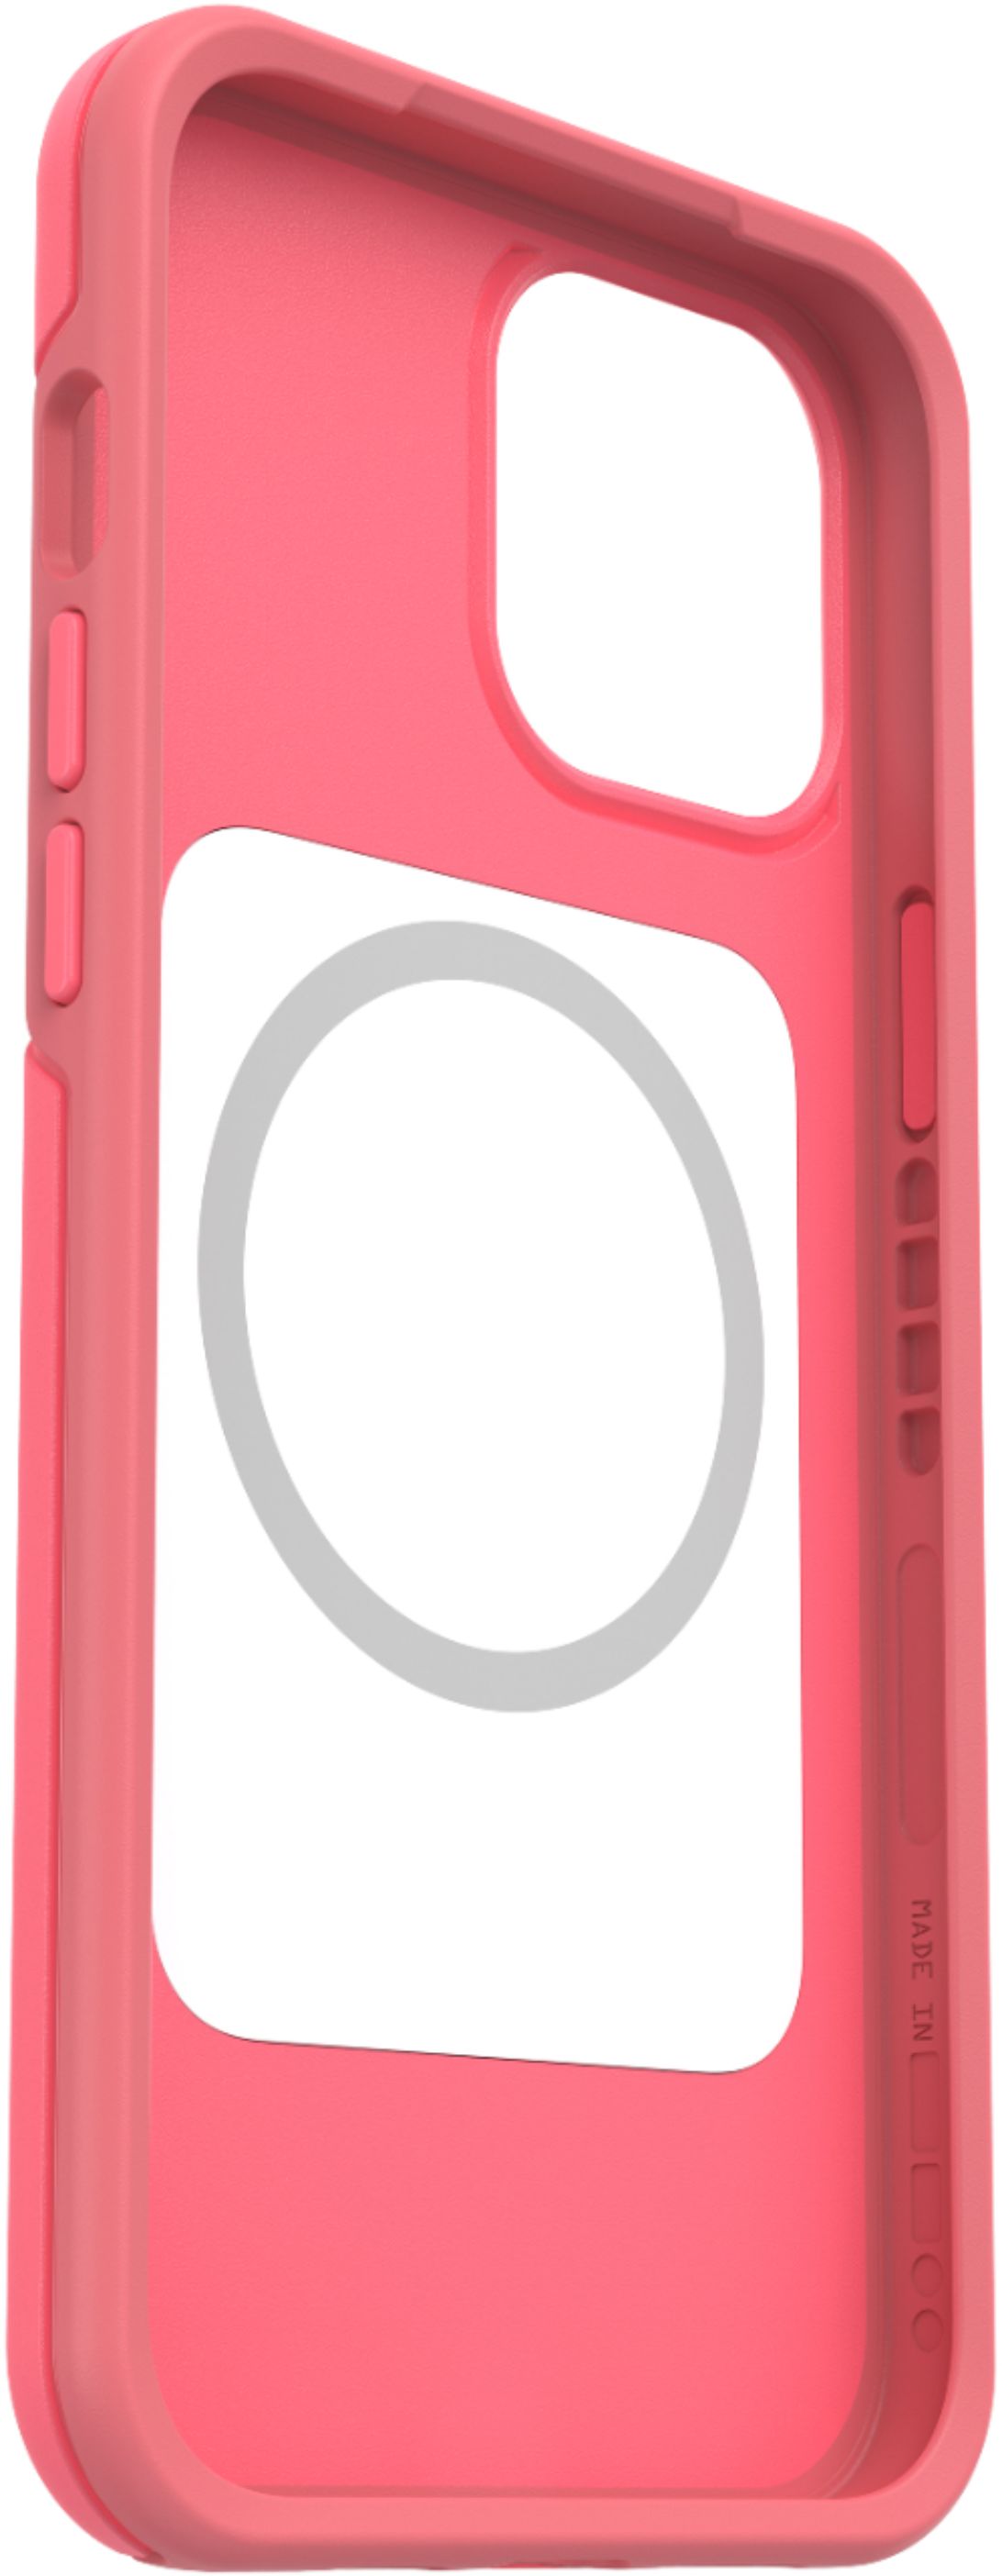 Left View: OtterBox - Commuter Antimicrobial Case for Apple iPhone 12 Pro Max